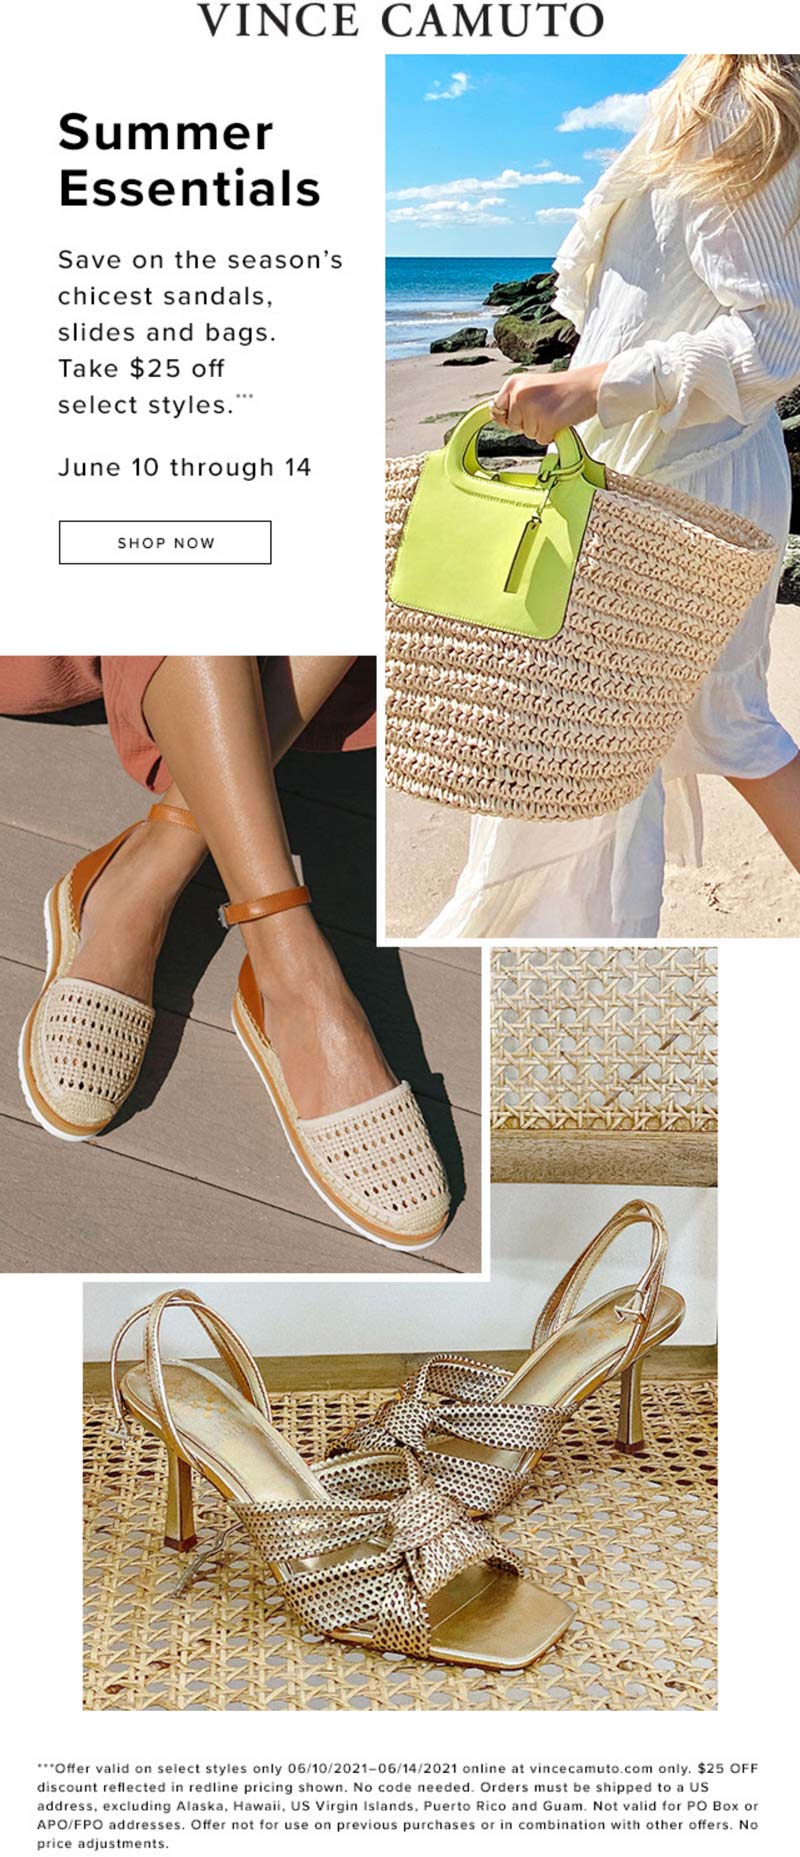 Vince Camuto stores Coupon  $25 off various sandals slides & bags online at Vince Camuto #vincecamuto 